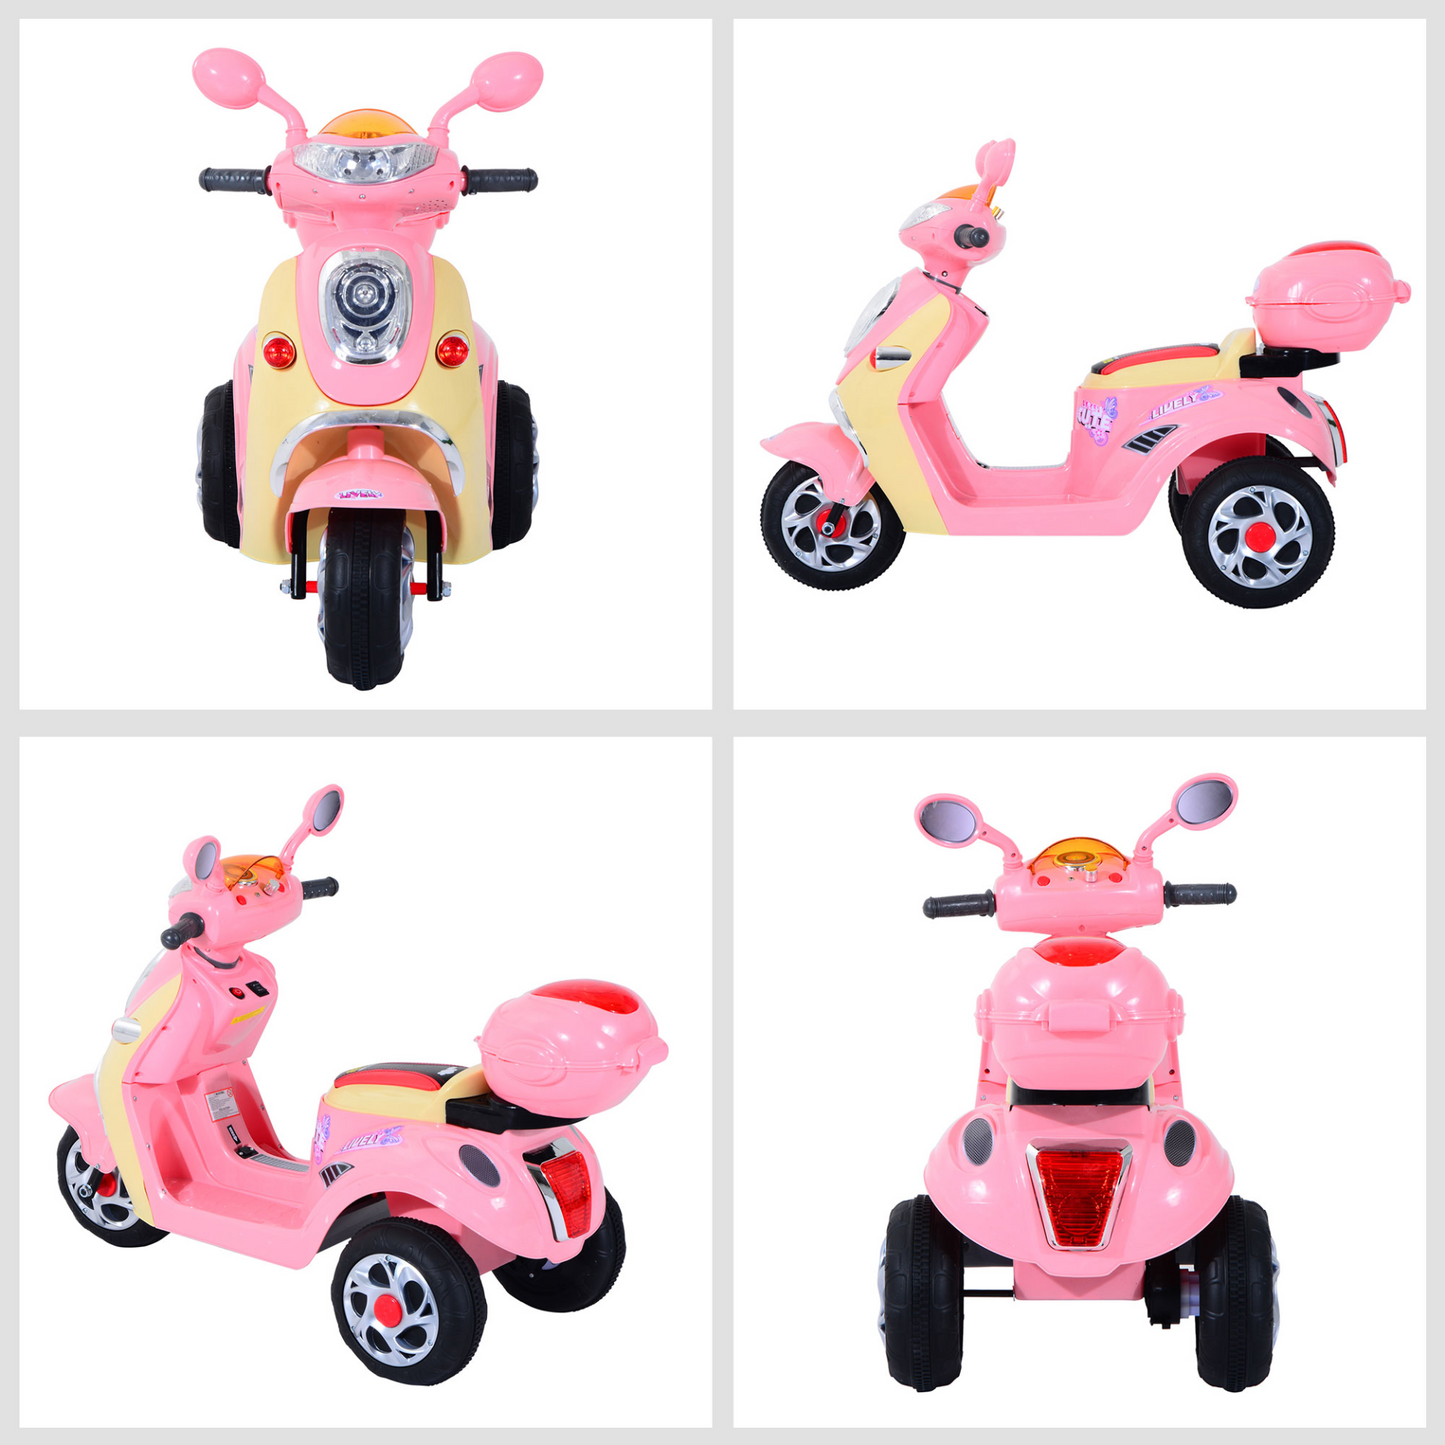 HOMCOM Kids Electric Ride On Toy Car Kids Motorbike Children Tricycle w/6V Chargeable Battery Headlight and Music for 3-5 Years (Pink)